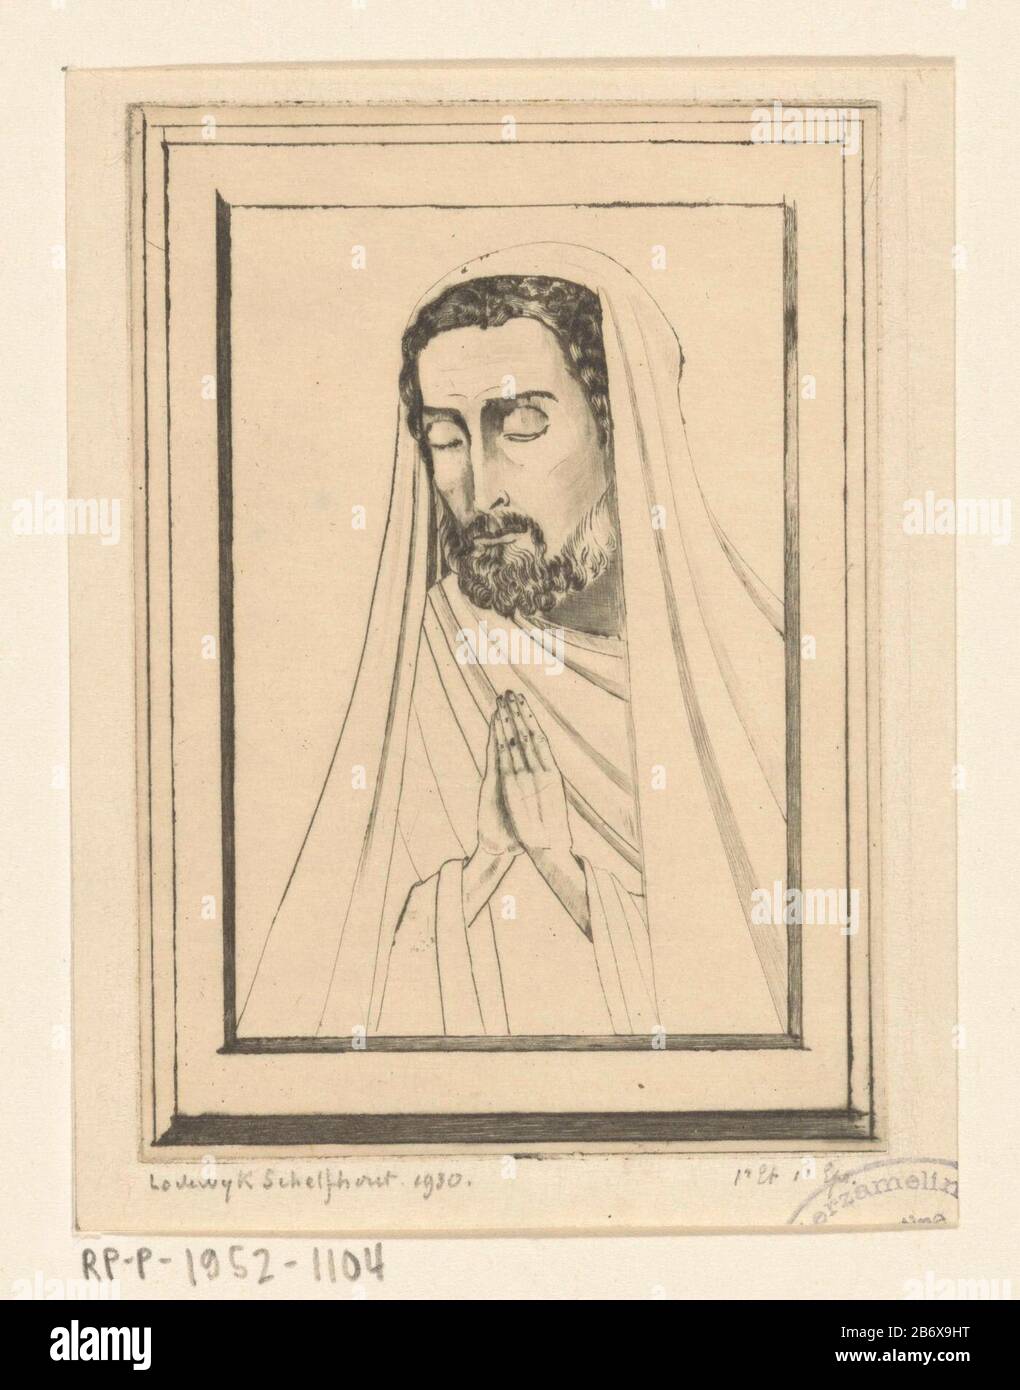 Jozef St Joseph (originele titel) Joseph, with folded hands and closed ogen. Manufacturer : printmaker Lodewijk Schelfhout (personally signed) printer: NV Roeloffzen & Hübner Dating: 1930 Physical features: drypoint on copper material: paper Technique: dry needle size: plate edge: h 120 mm × W 85 mm Subject: the foster-father of Christ, Joseph of Nazareth, husband of Mary; possible attributes: flowering rod or wall, lily, carpenter's toolsone person praying Stock Photo